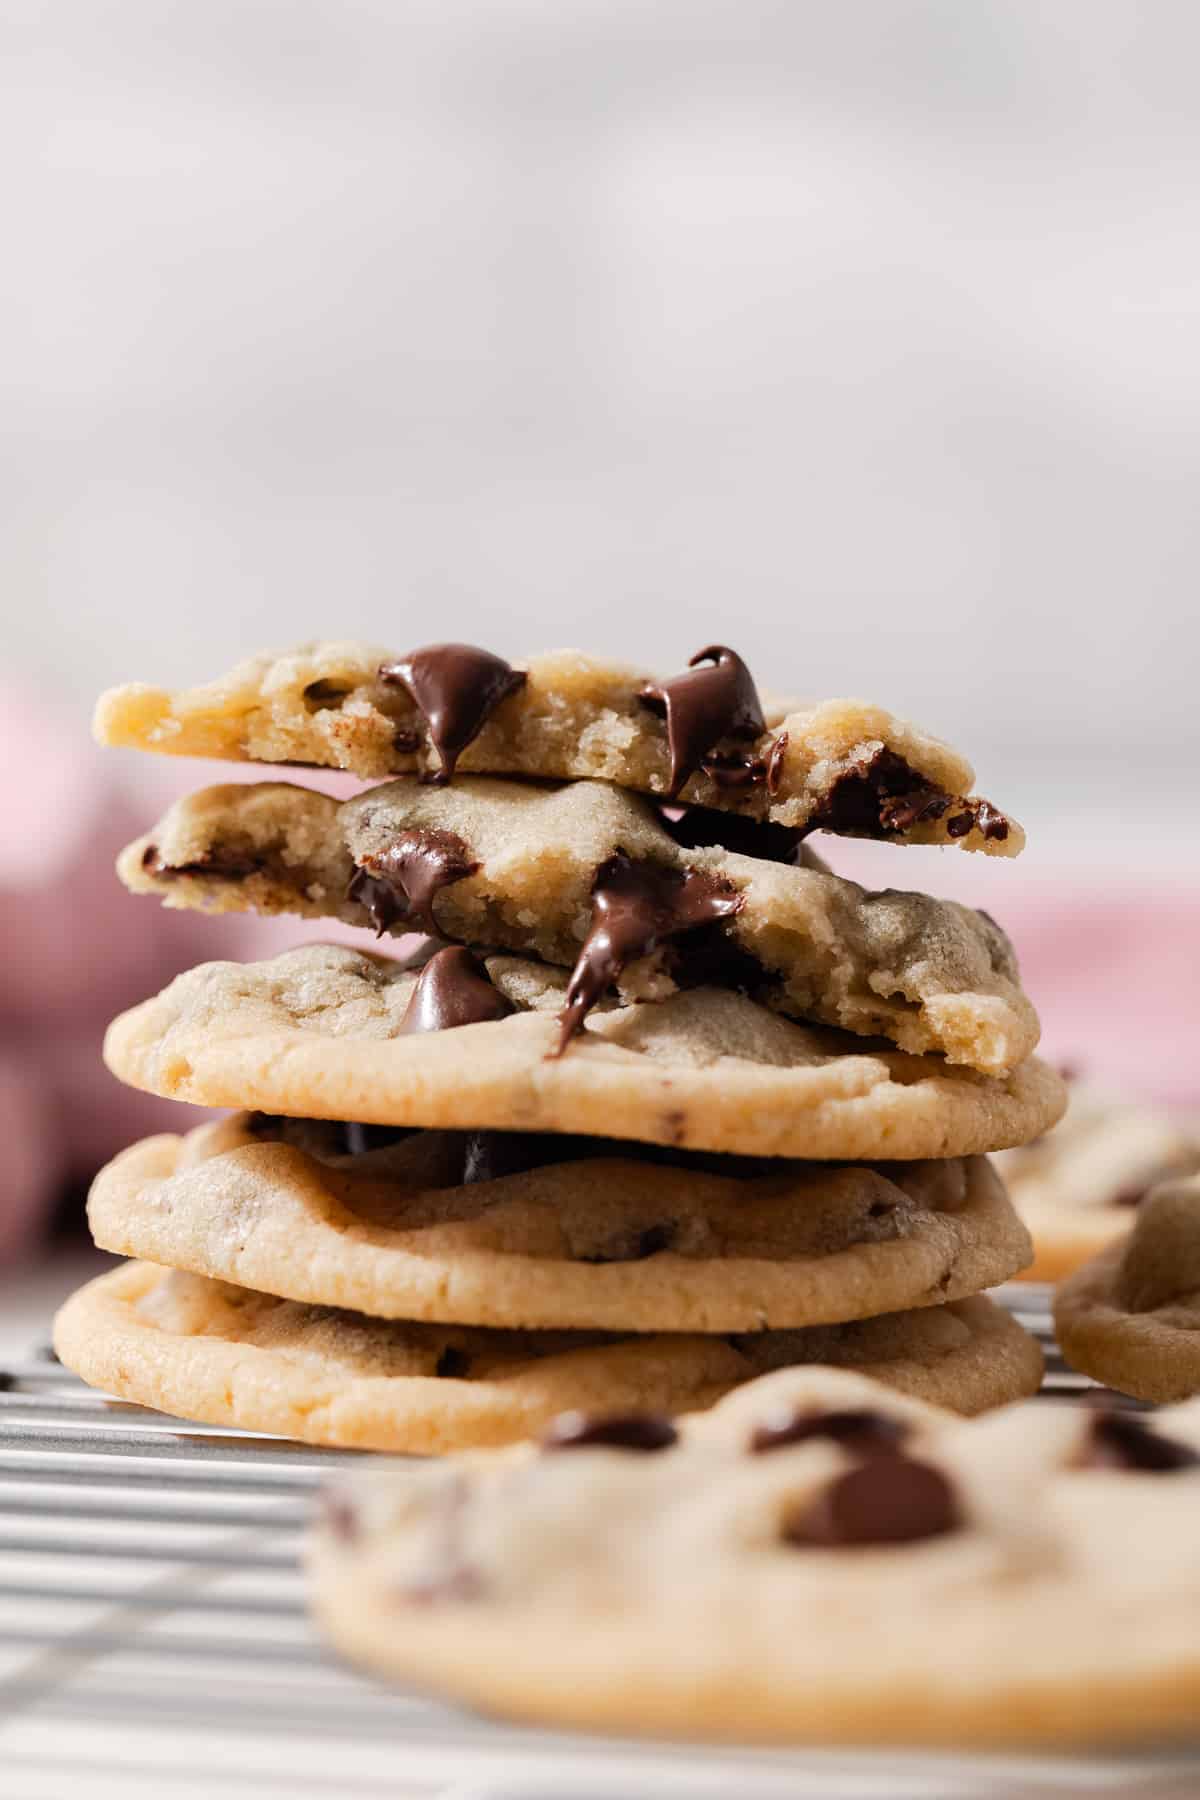 A stack of melty chocolate chip cookies made without eggs.